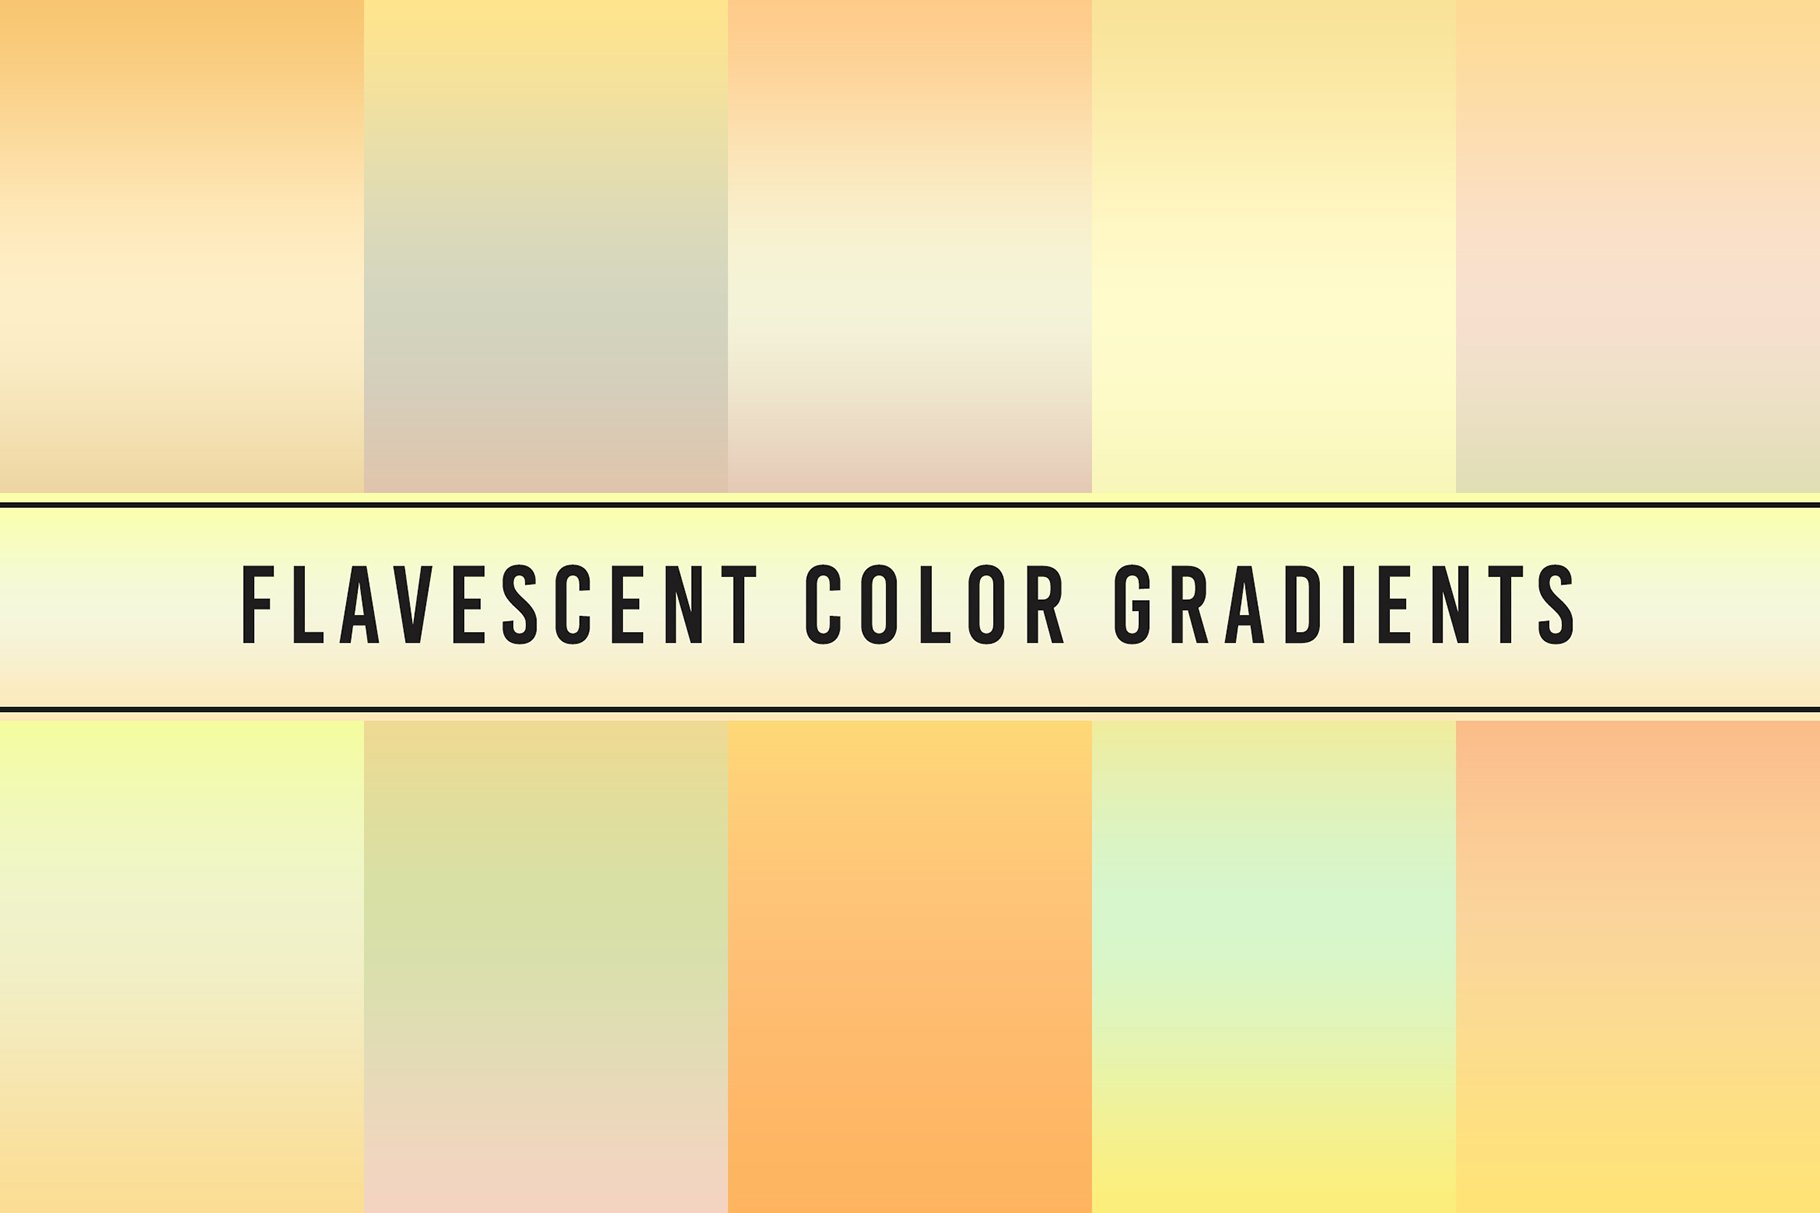 Flavescent Color Gradients cover image.